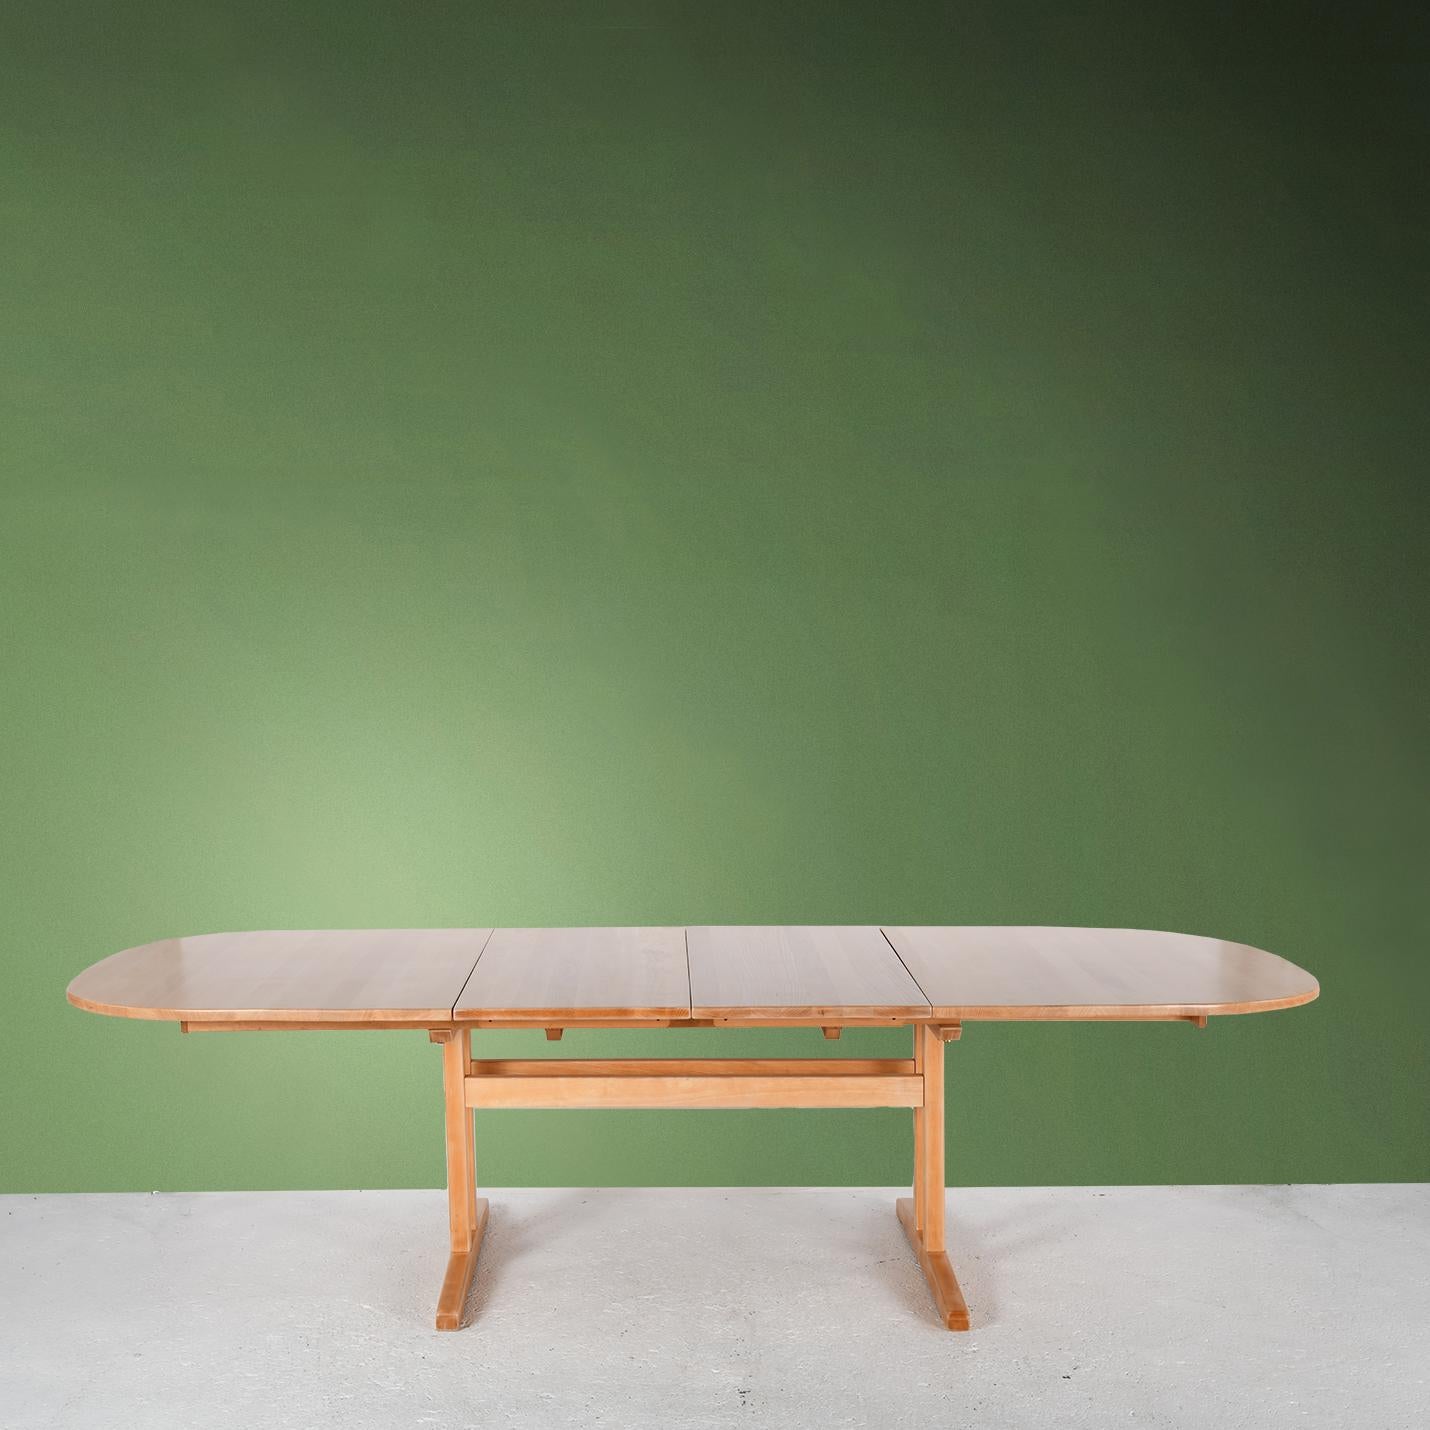 Solid beech oval table with two sliding tops and two extensions. This table comes from Denmark and was designed in the early 2000s. 
It has been completely sanded and protected with a satin varnish. The two extension leaves can be stored under the